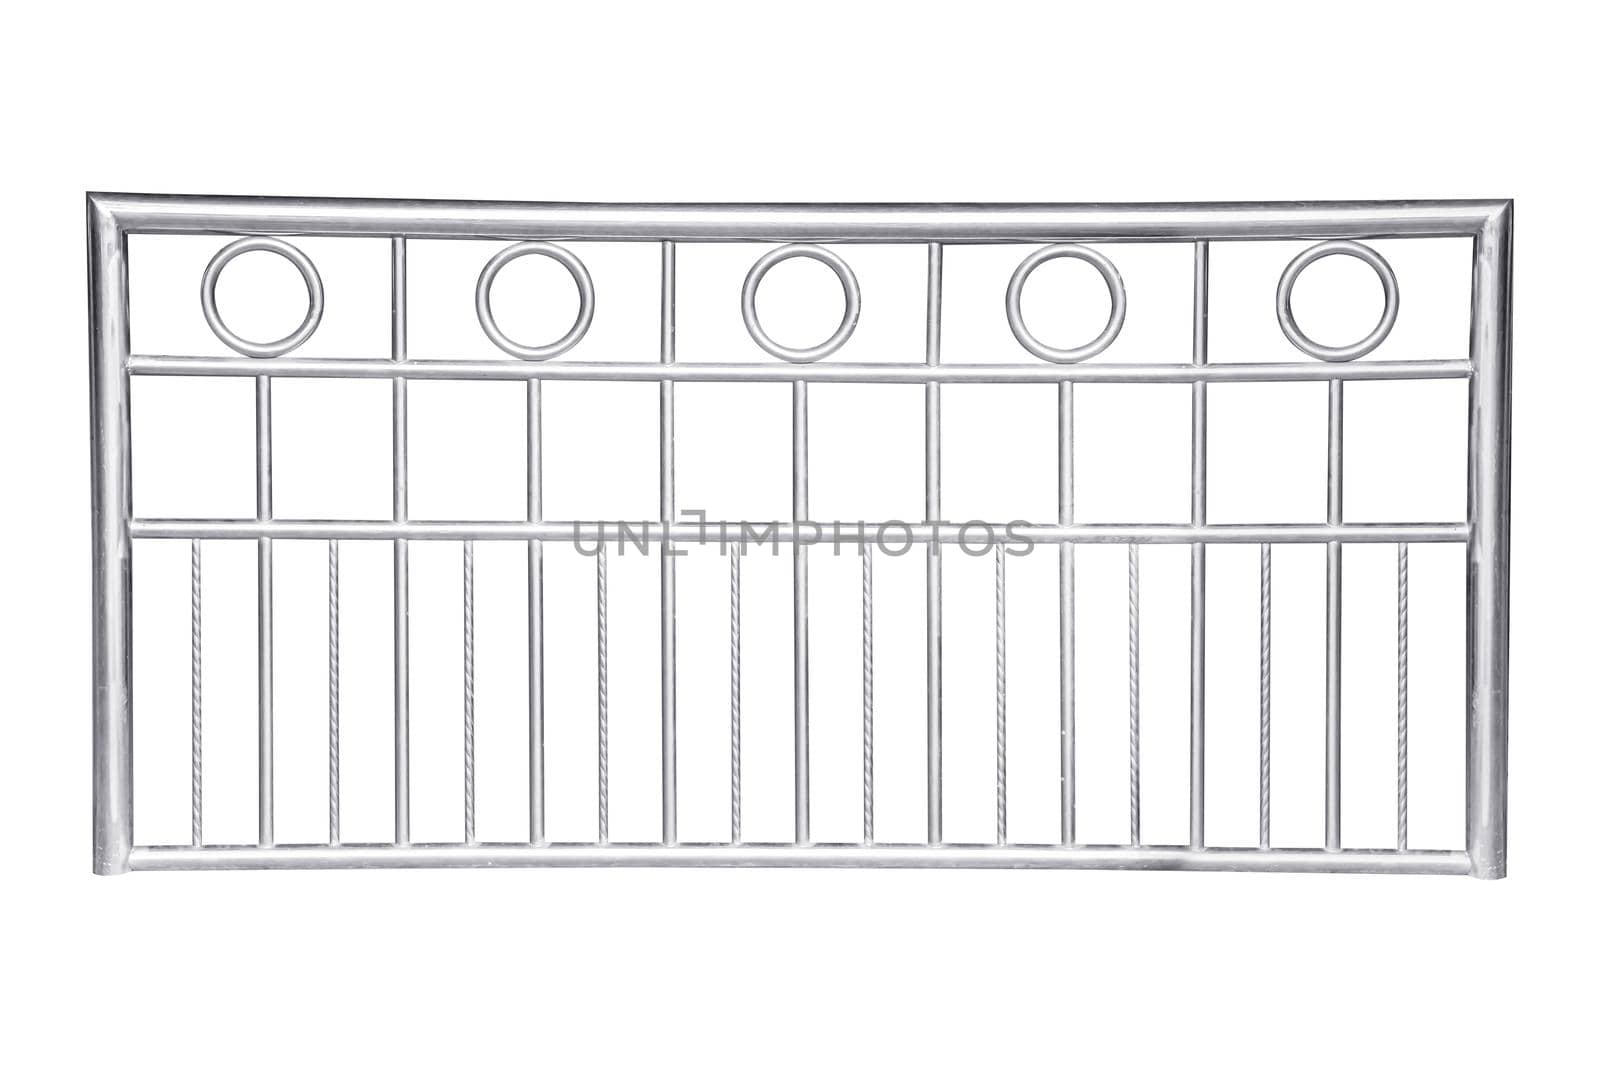 Stainless steel railing isolated on white, with clipping path.